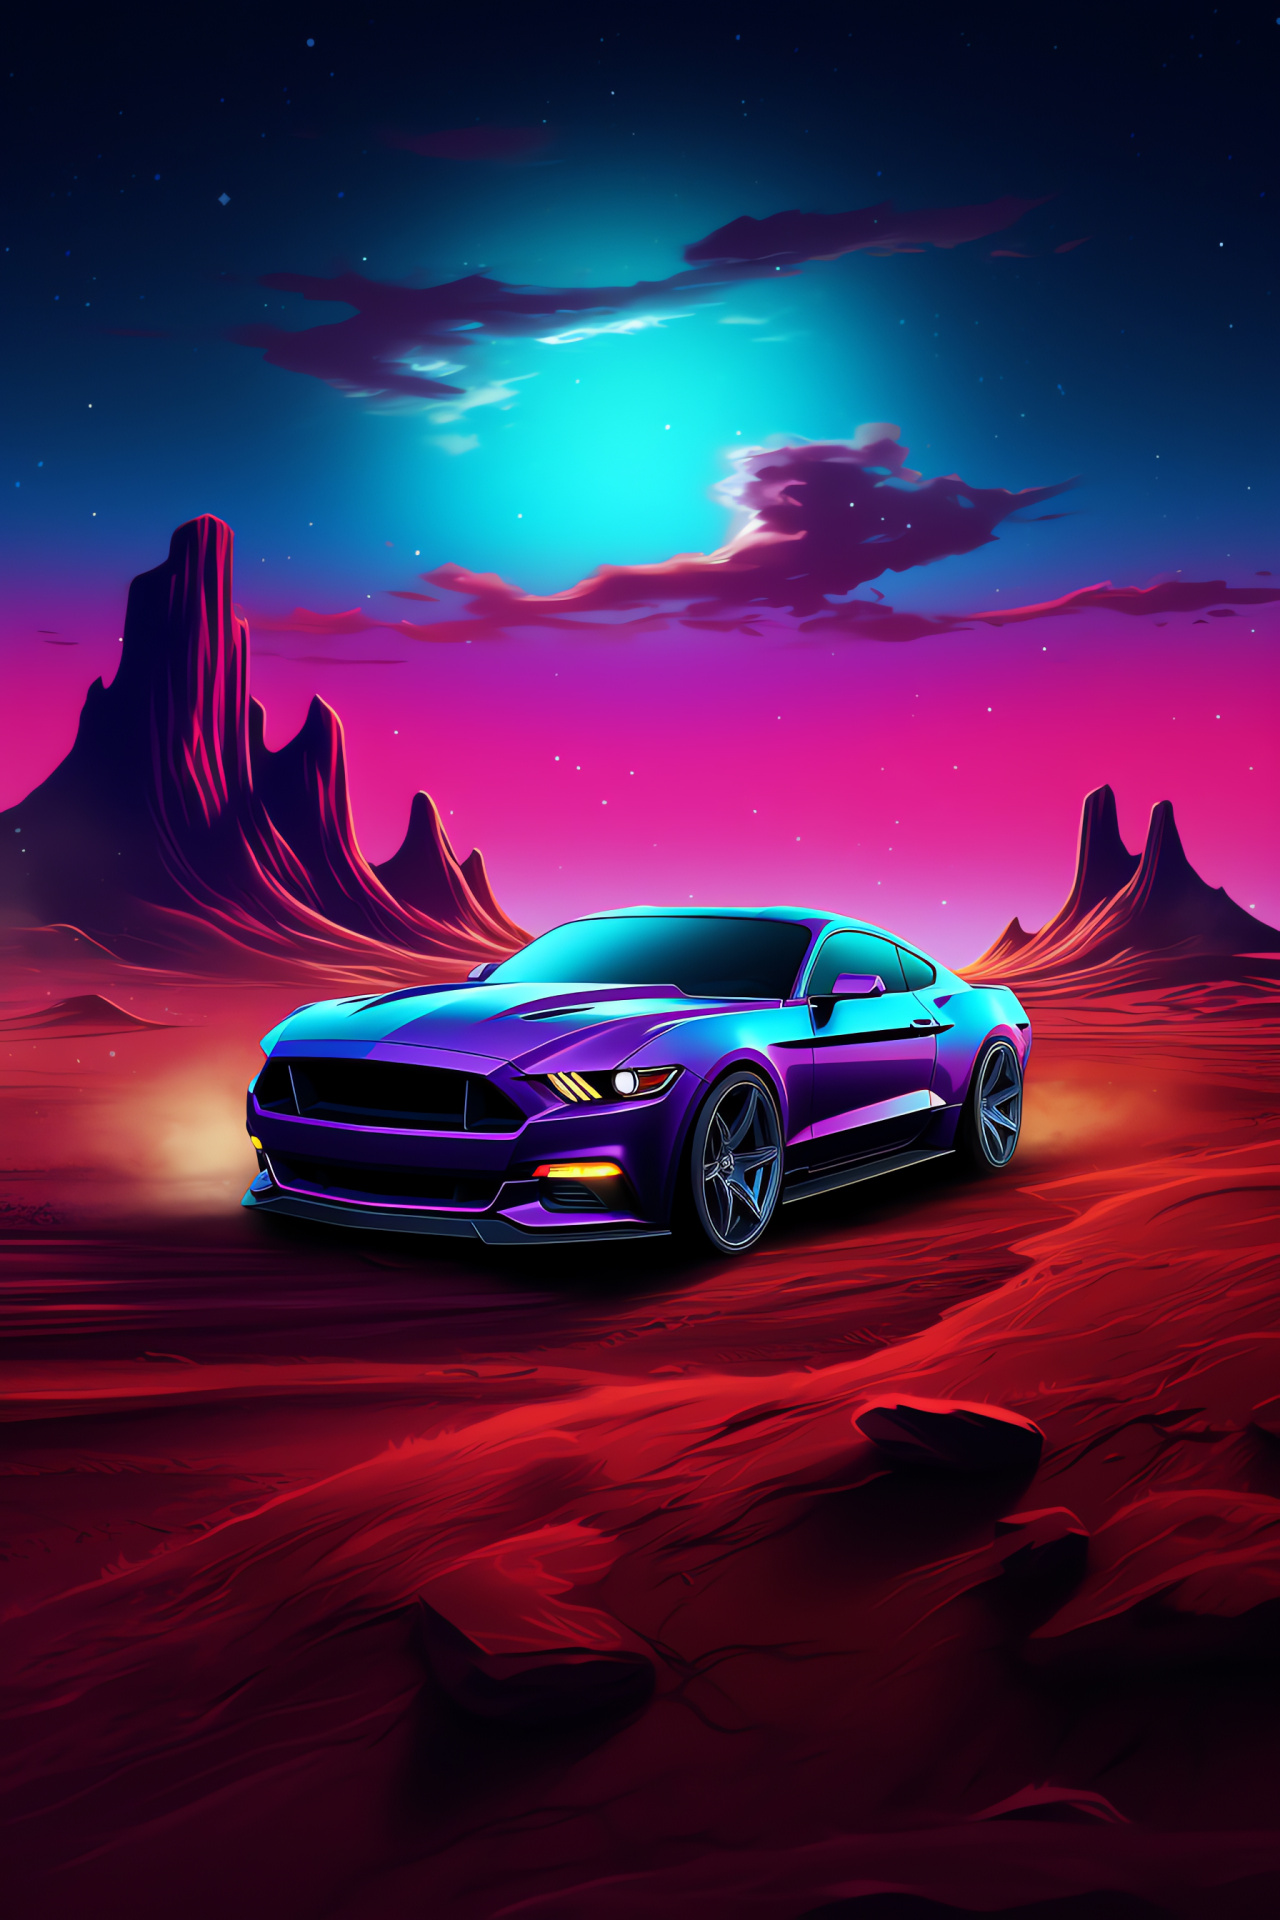 Ford Mustang, Ground-level viewpoint, Broad-reaching terrain spread, Dreamlike natural vista, Silhouette car outline, HD Phone Image